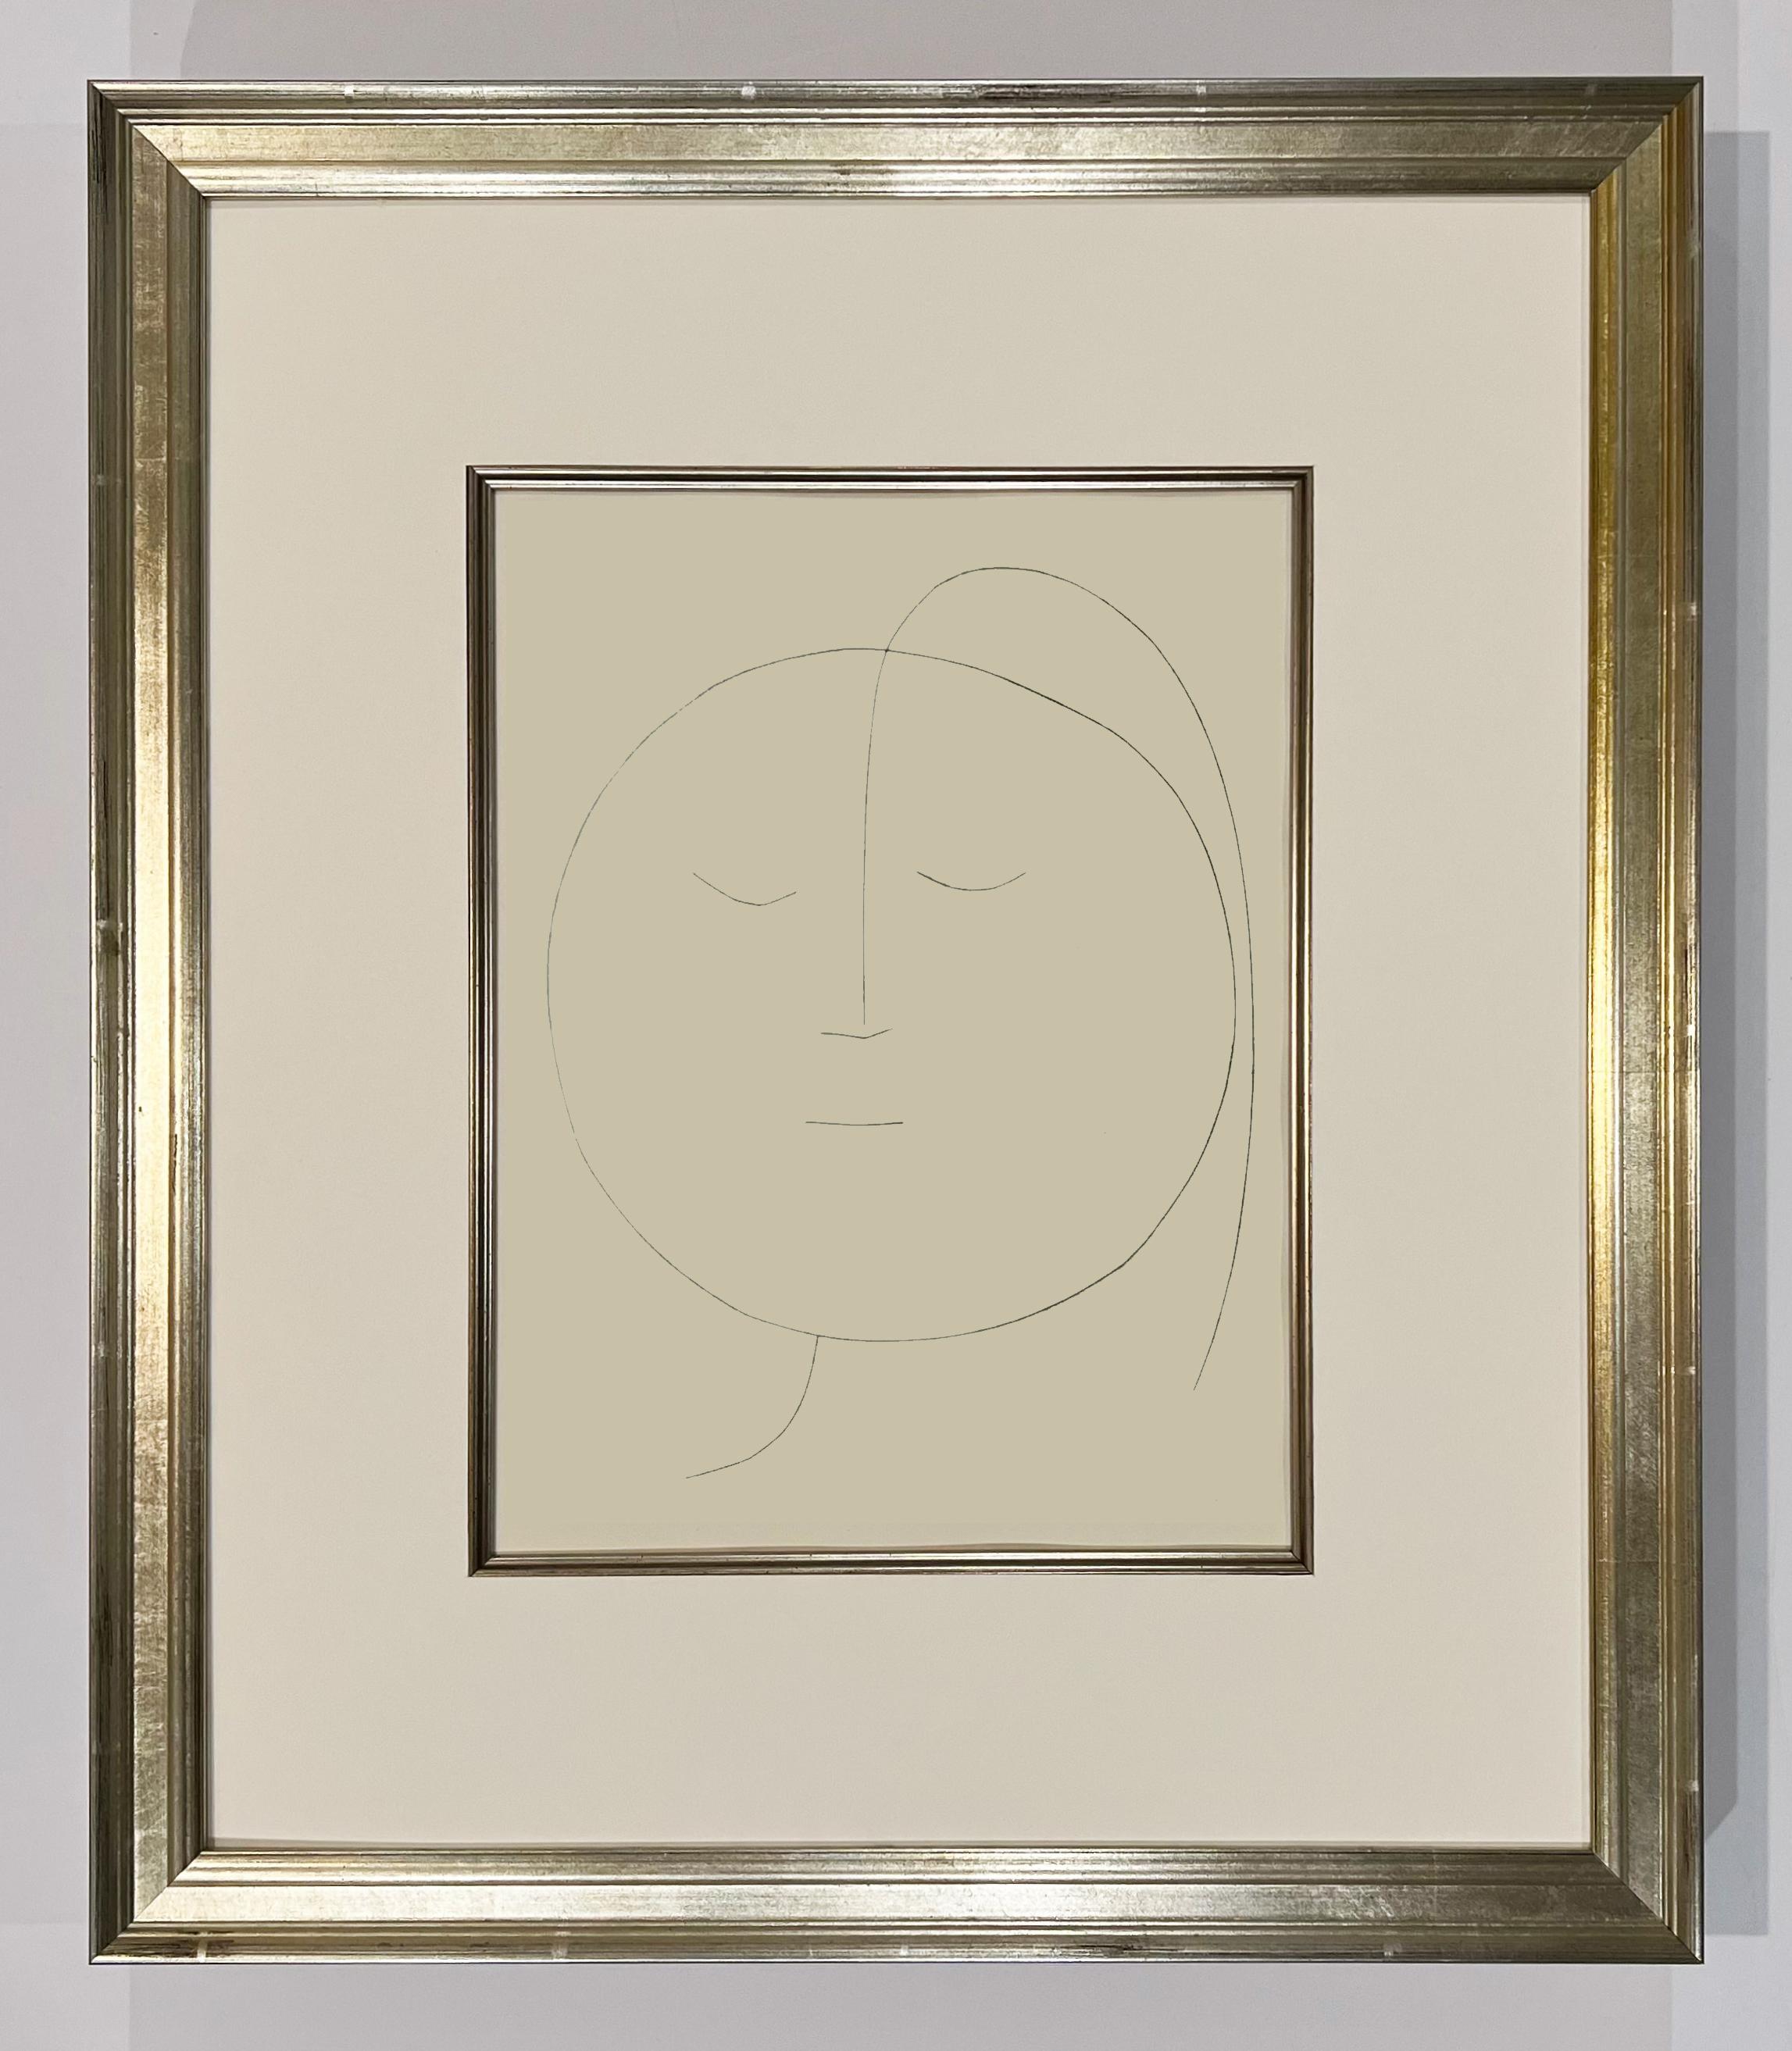 Round Head of a Woman with Hair (Plate XVIII), from Carmen - Print by Pablo Picasso